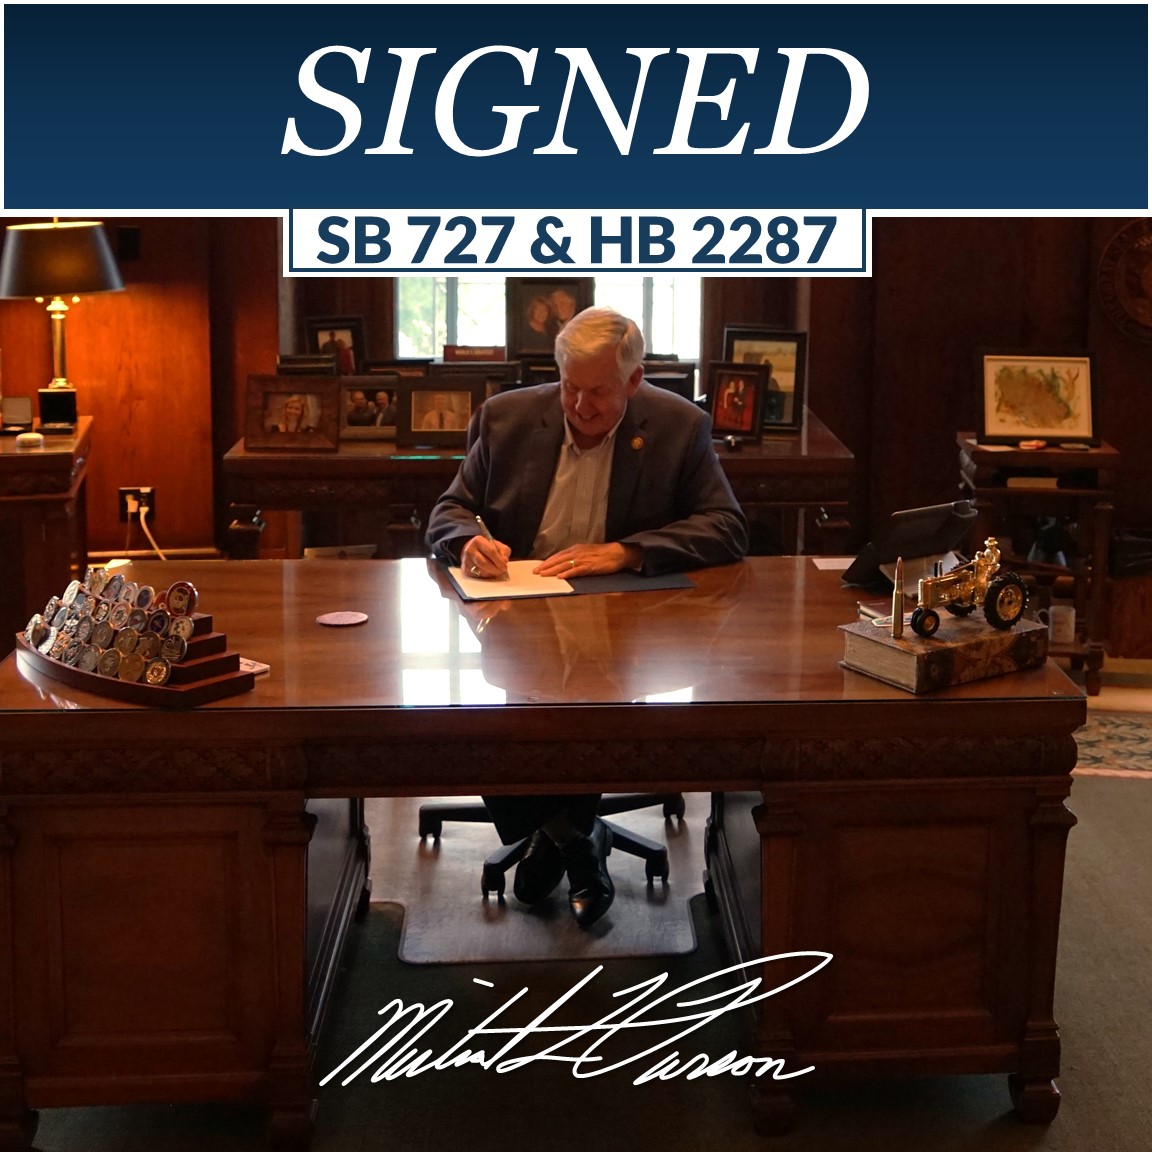 Today was another win for students as @GovParsonMO just signed the biggest education reform in state history. SB 727 and HB 2287 were a win-win-win package that supports public education, expands school choice options, and protects homeschooling. #moleg